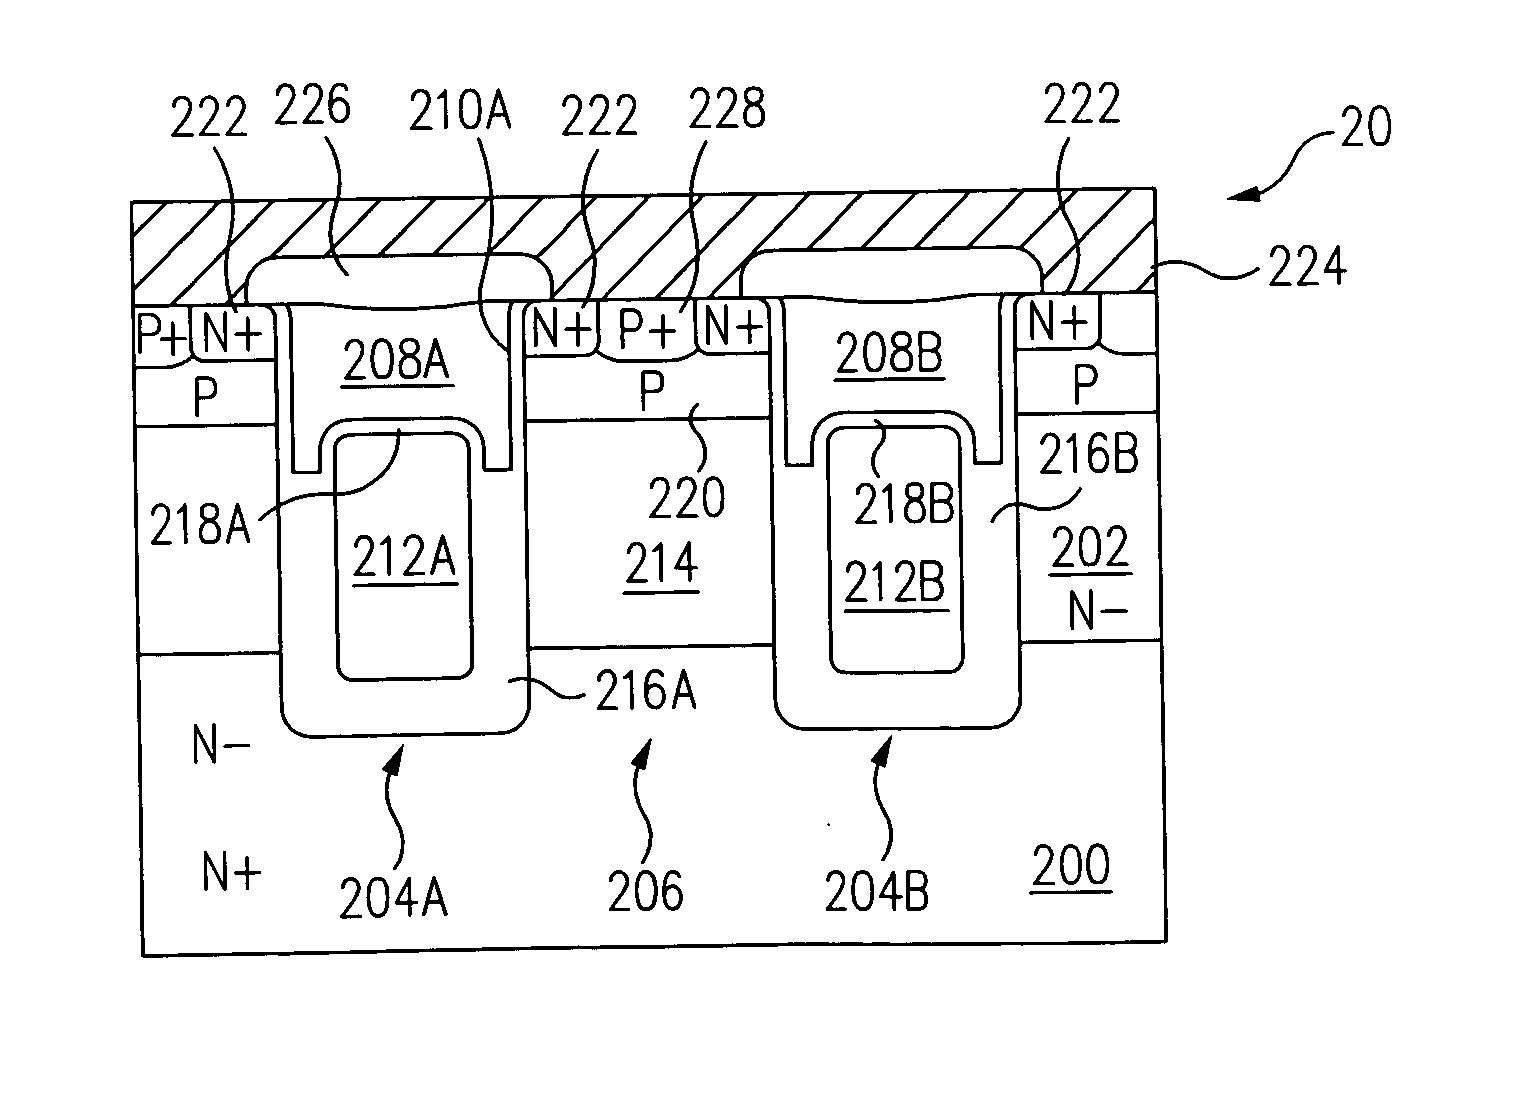 Super trench MOSFET including buried source electrode and method of fabricating the same